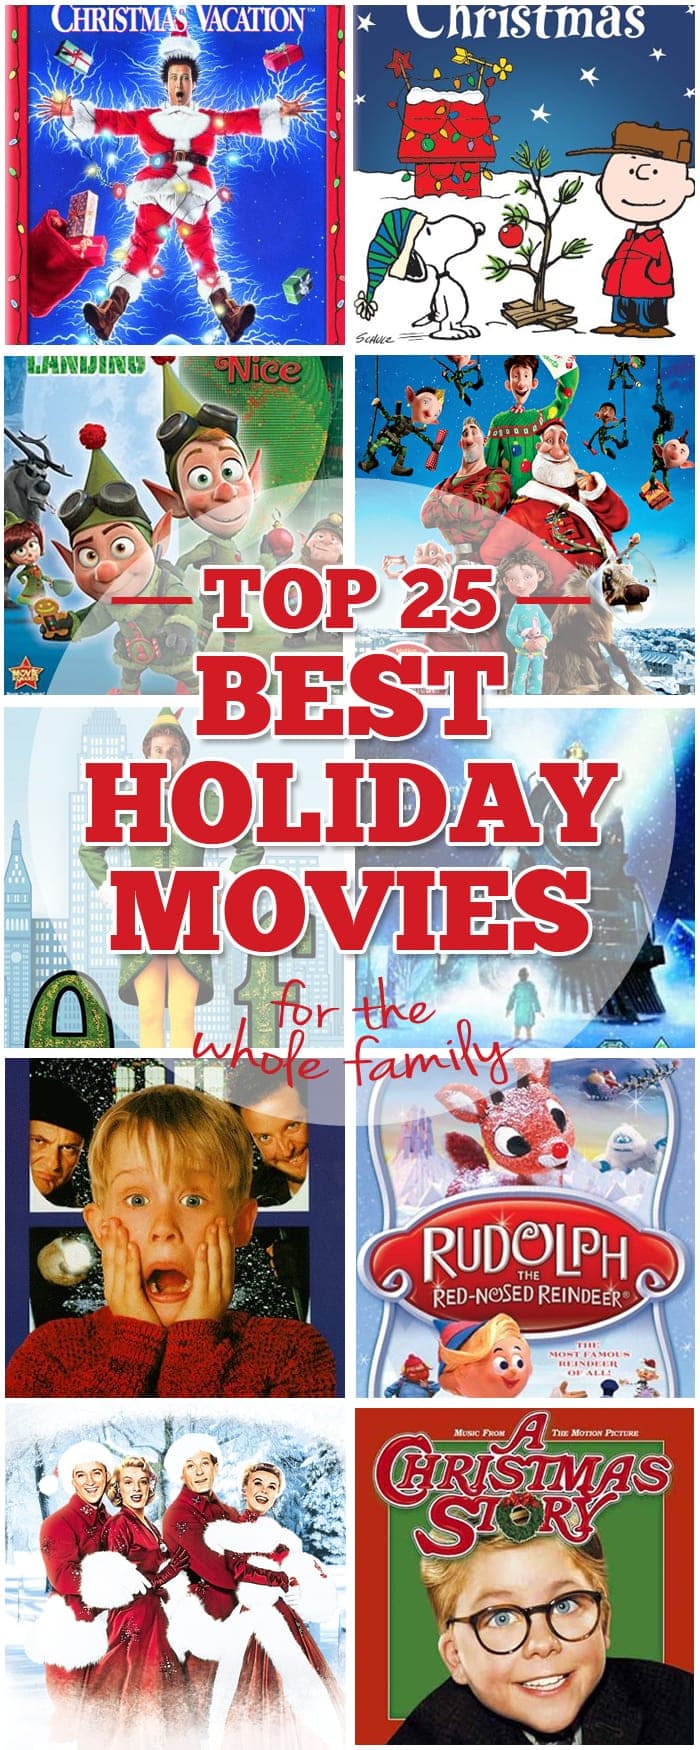 Top 25 Best Holiday Movies for the Whole Family